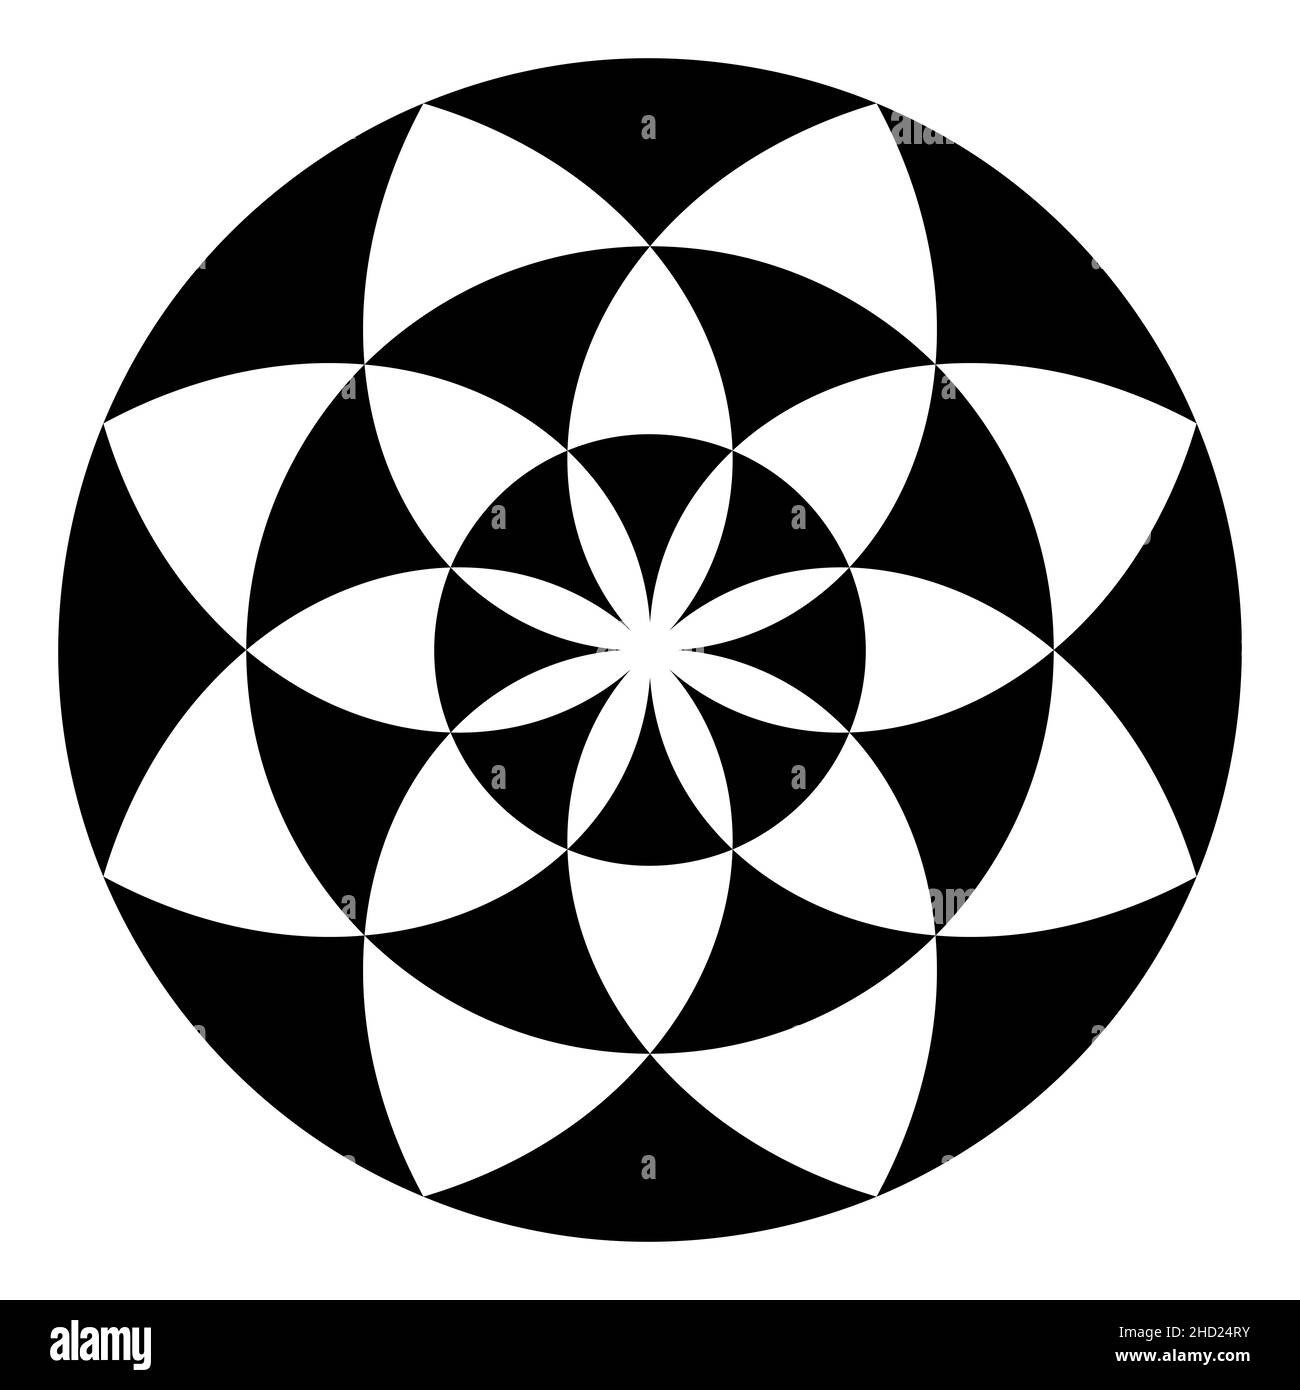 Flower symbol, derived from triangle shaped pattern. Symbol of a blossom with eight petals, created with arches. Also a white eight-pointed star. Stock Photo